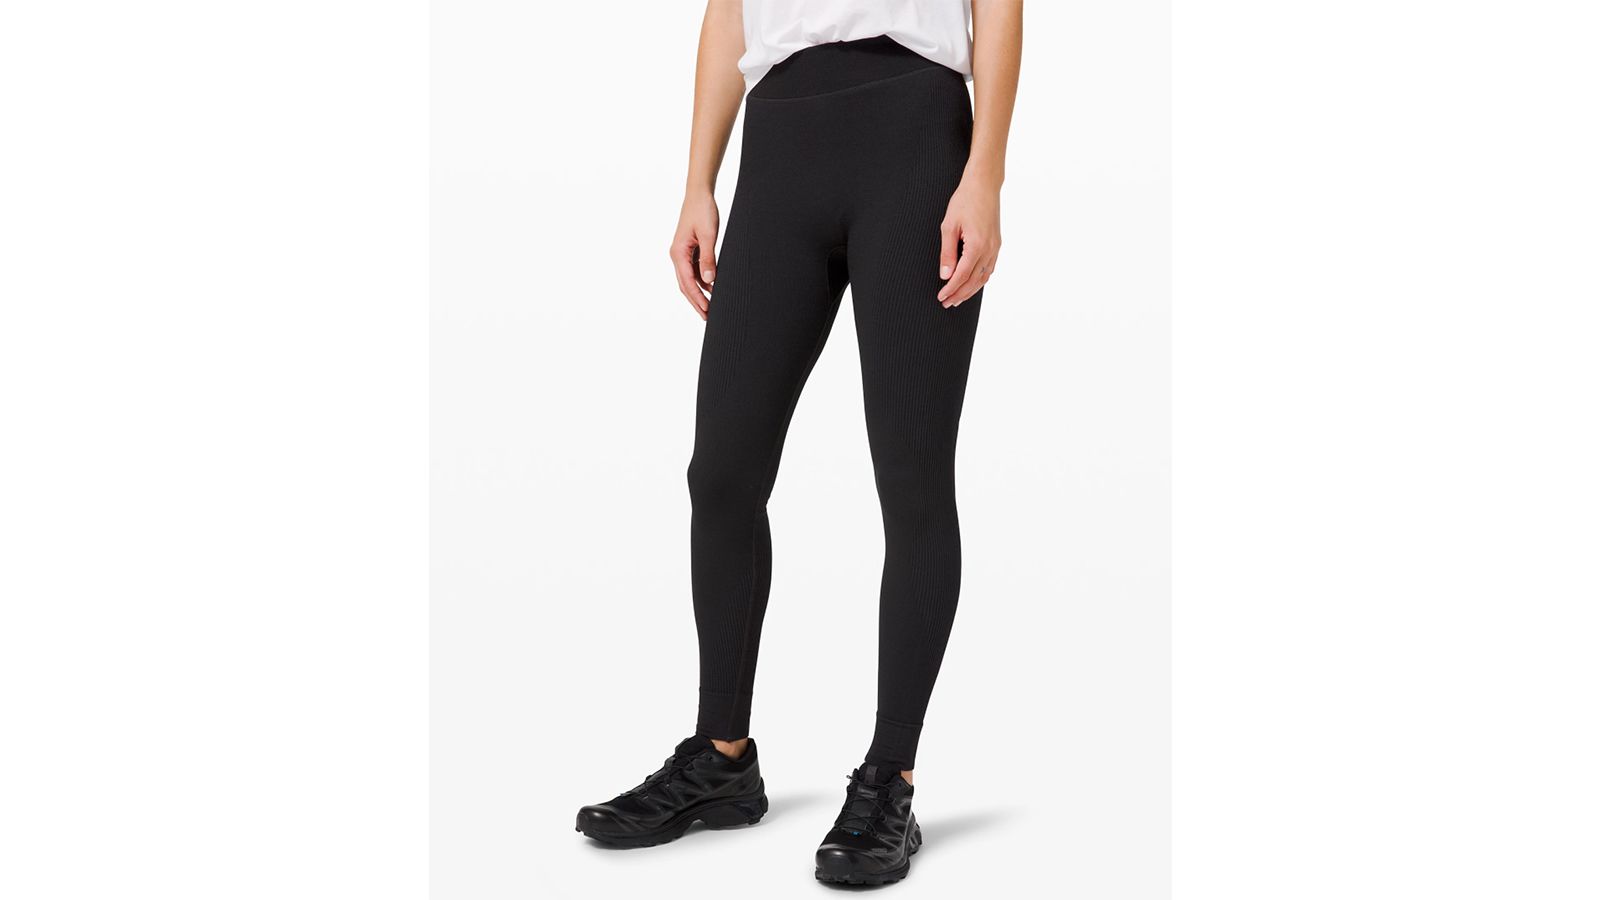 These $50 Best-Selling Yoga Pants Are Majorly Marked Down to Just $26 at